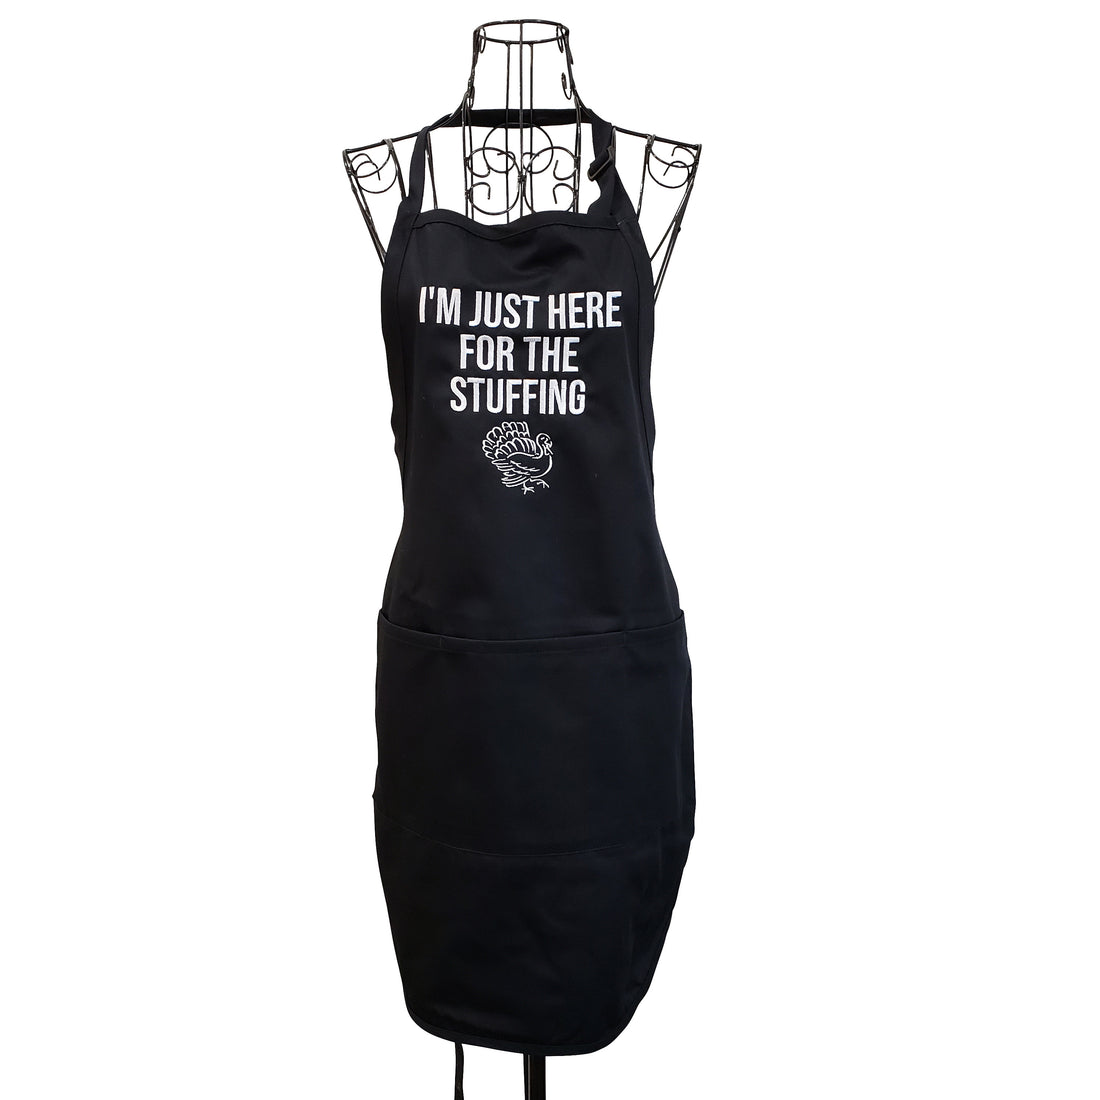 Funny Black Thanksgiving  Embroidered Apron, Here for the stuffing Full Length Apron